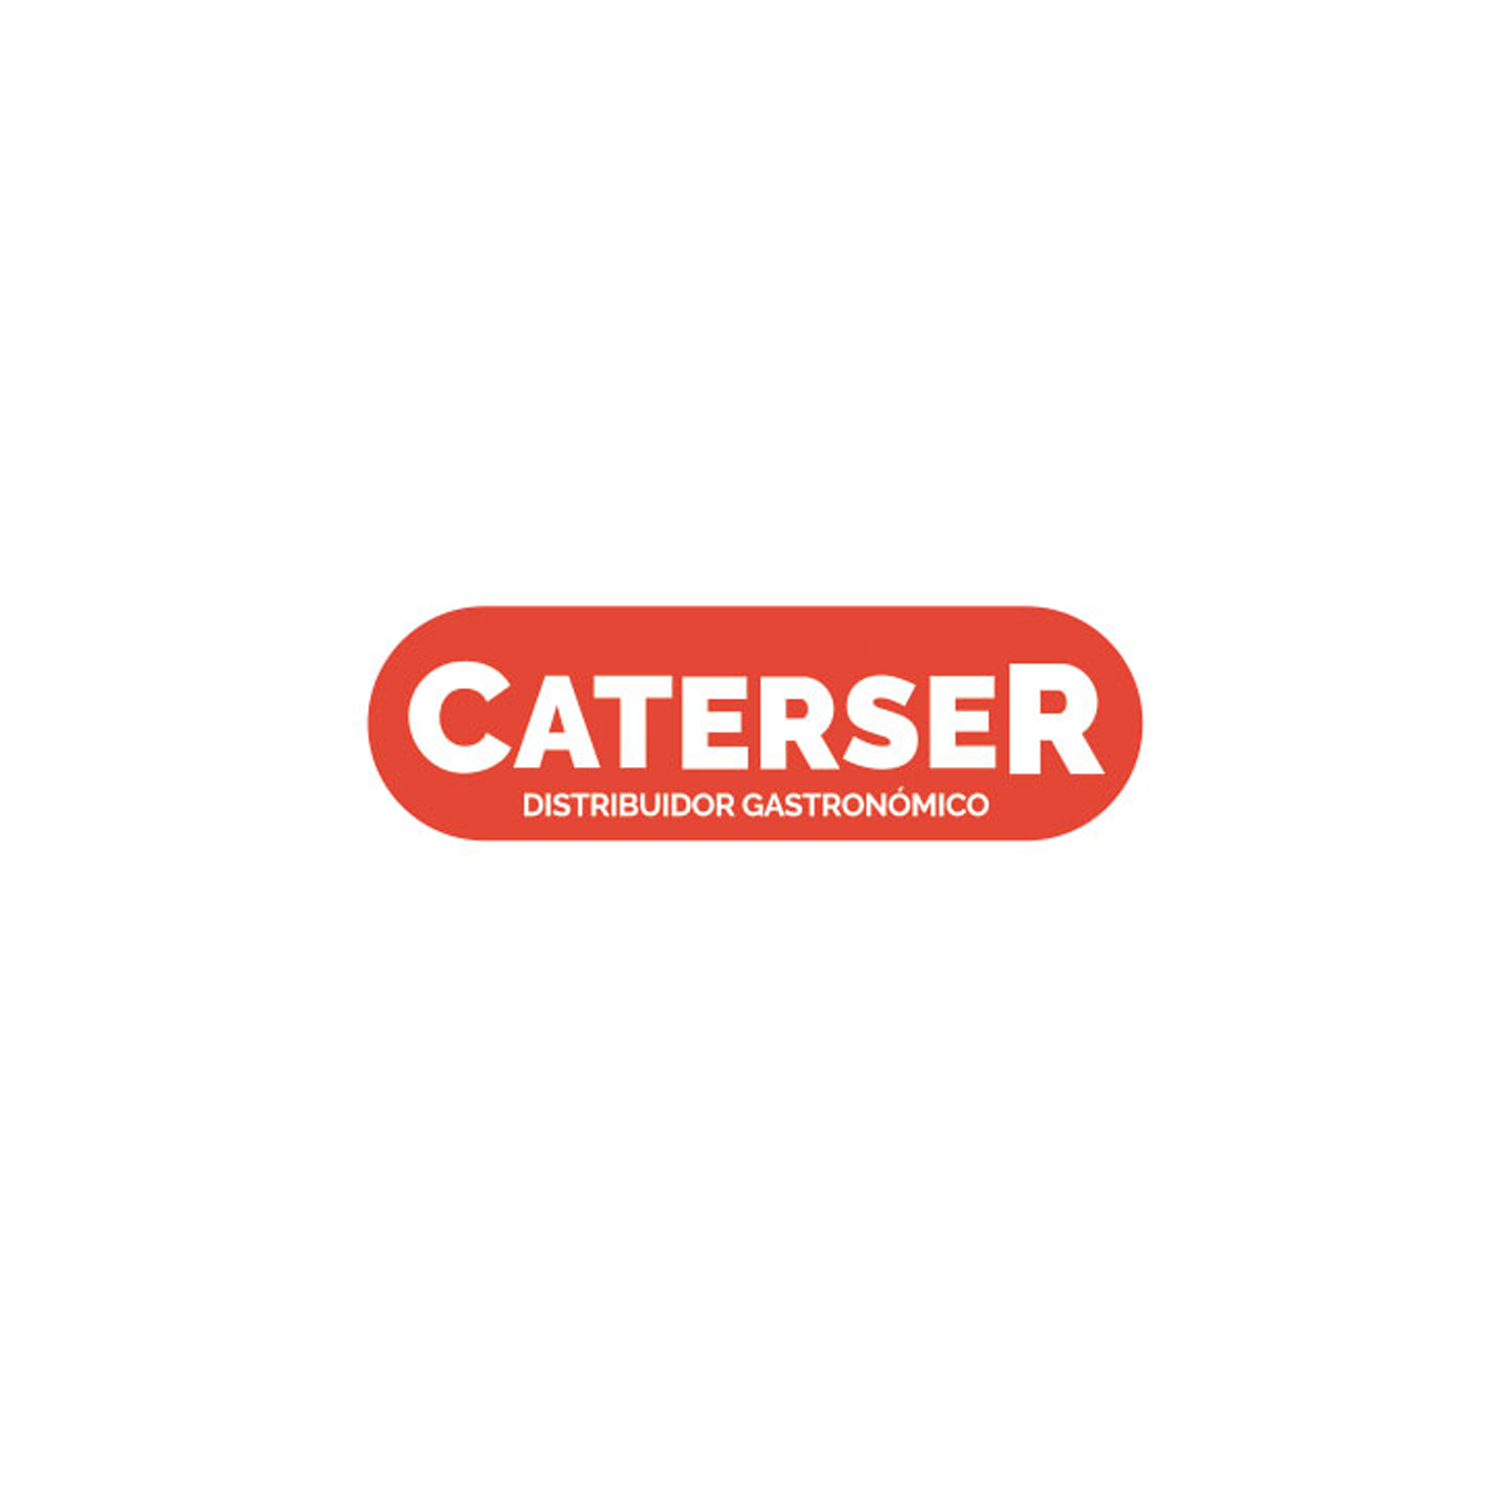 Caterser